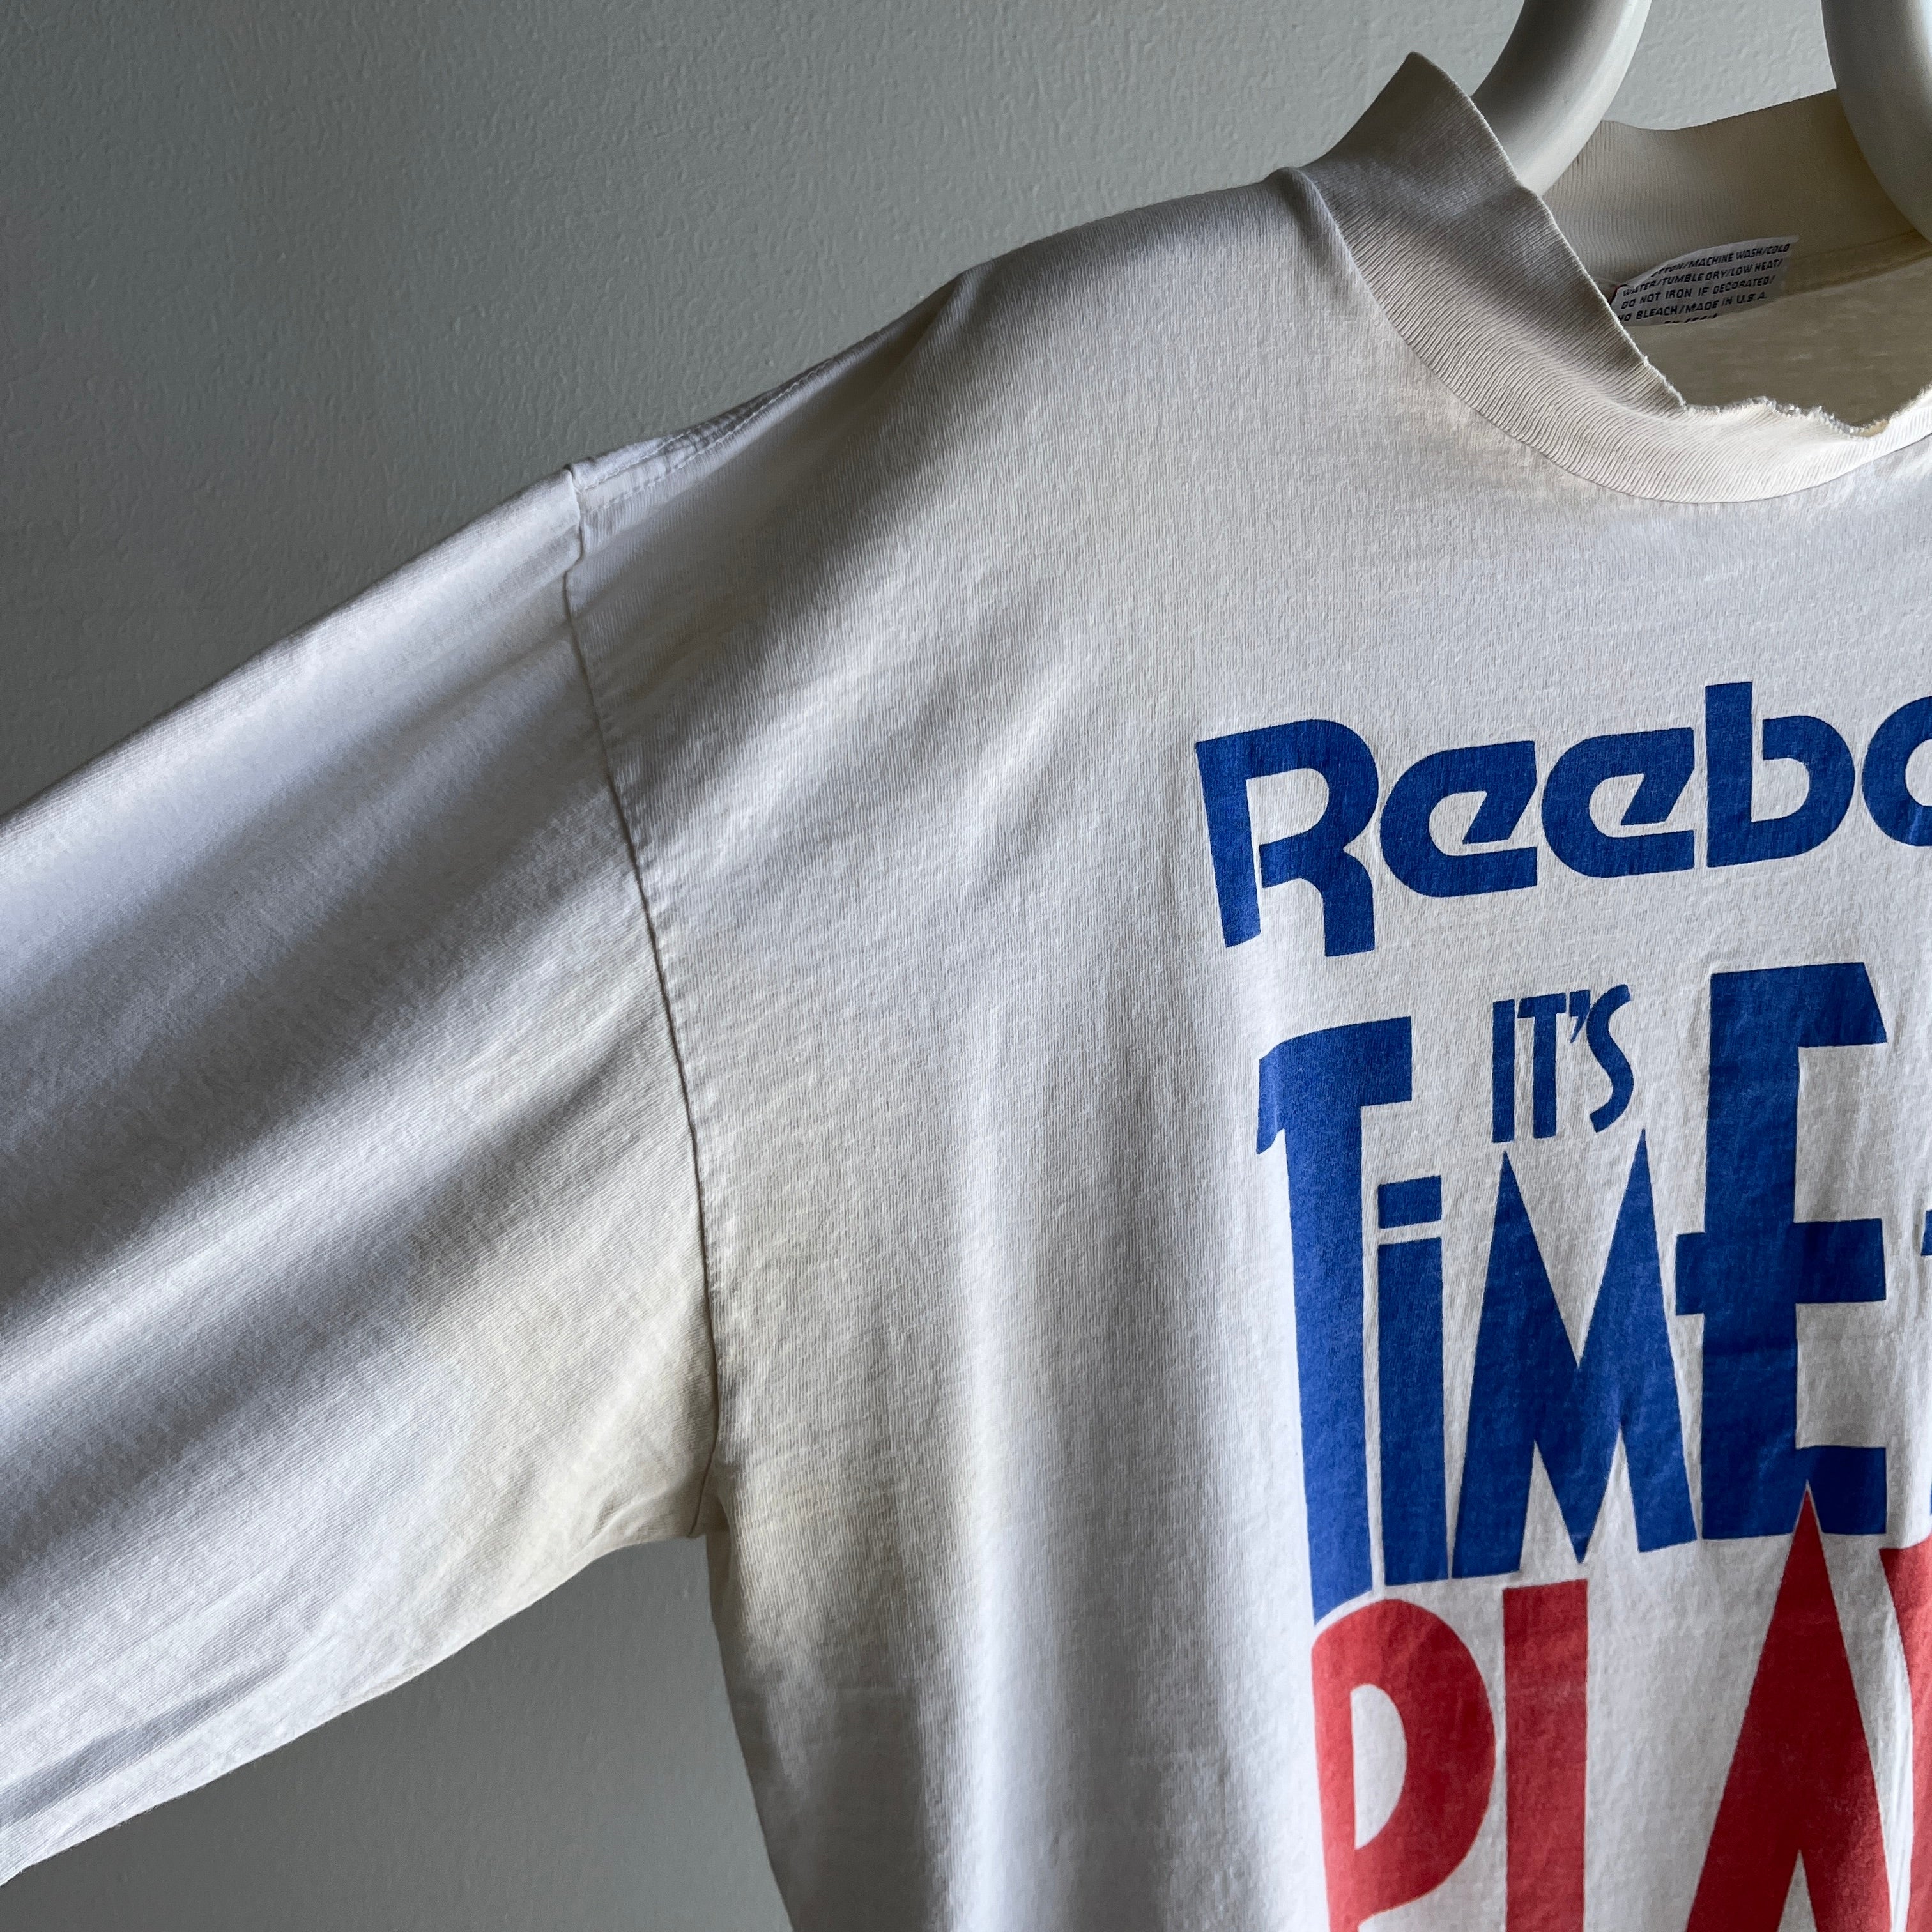 1980s Reebox - It's Time To Play Mock Neck Worn Out Long Sleeve T-Shirt